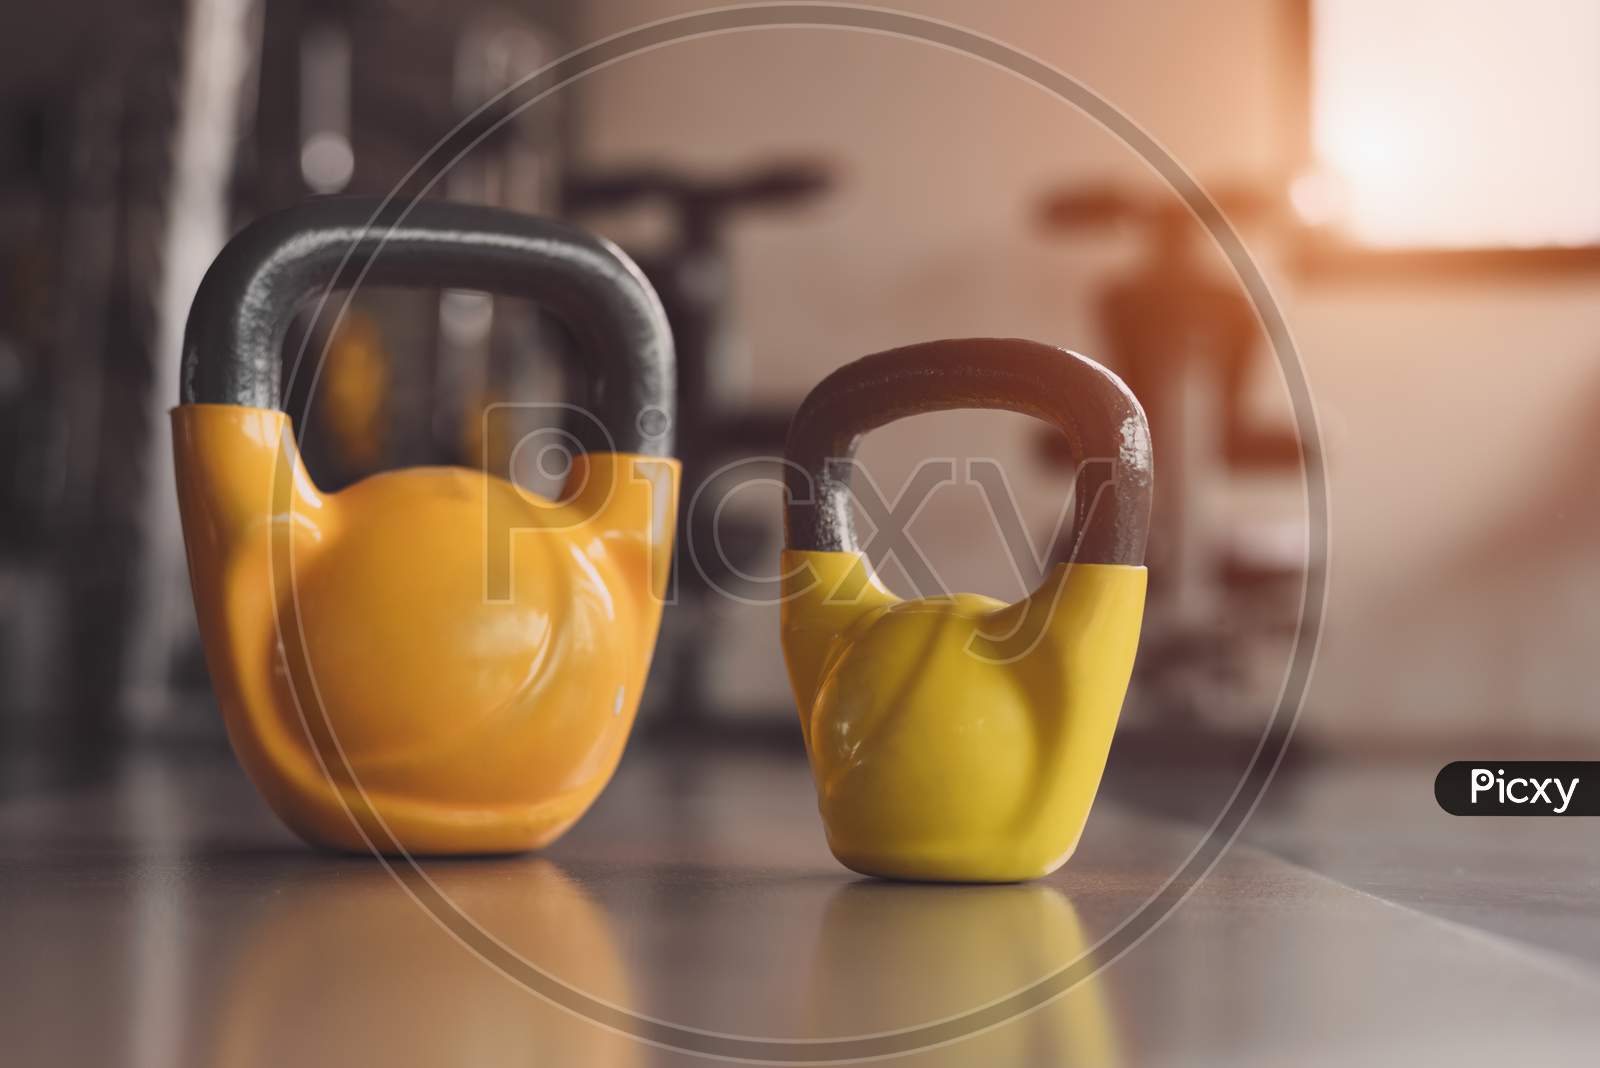 Kettlebells Or Dumbbells On Fitness Gym Floor. Heavy Weight Sports Equipment And Accessories In Workouts Training Club. Body Building Muscle And Strength Weightlifting. Lifestyle And Indoors Activity.